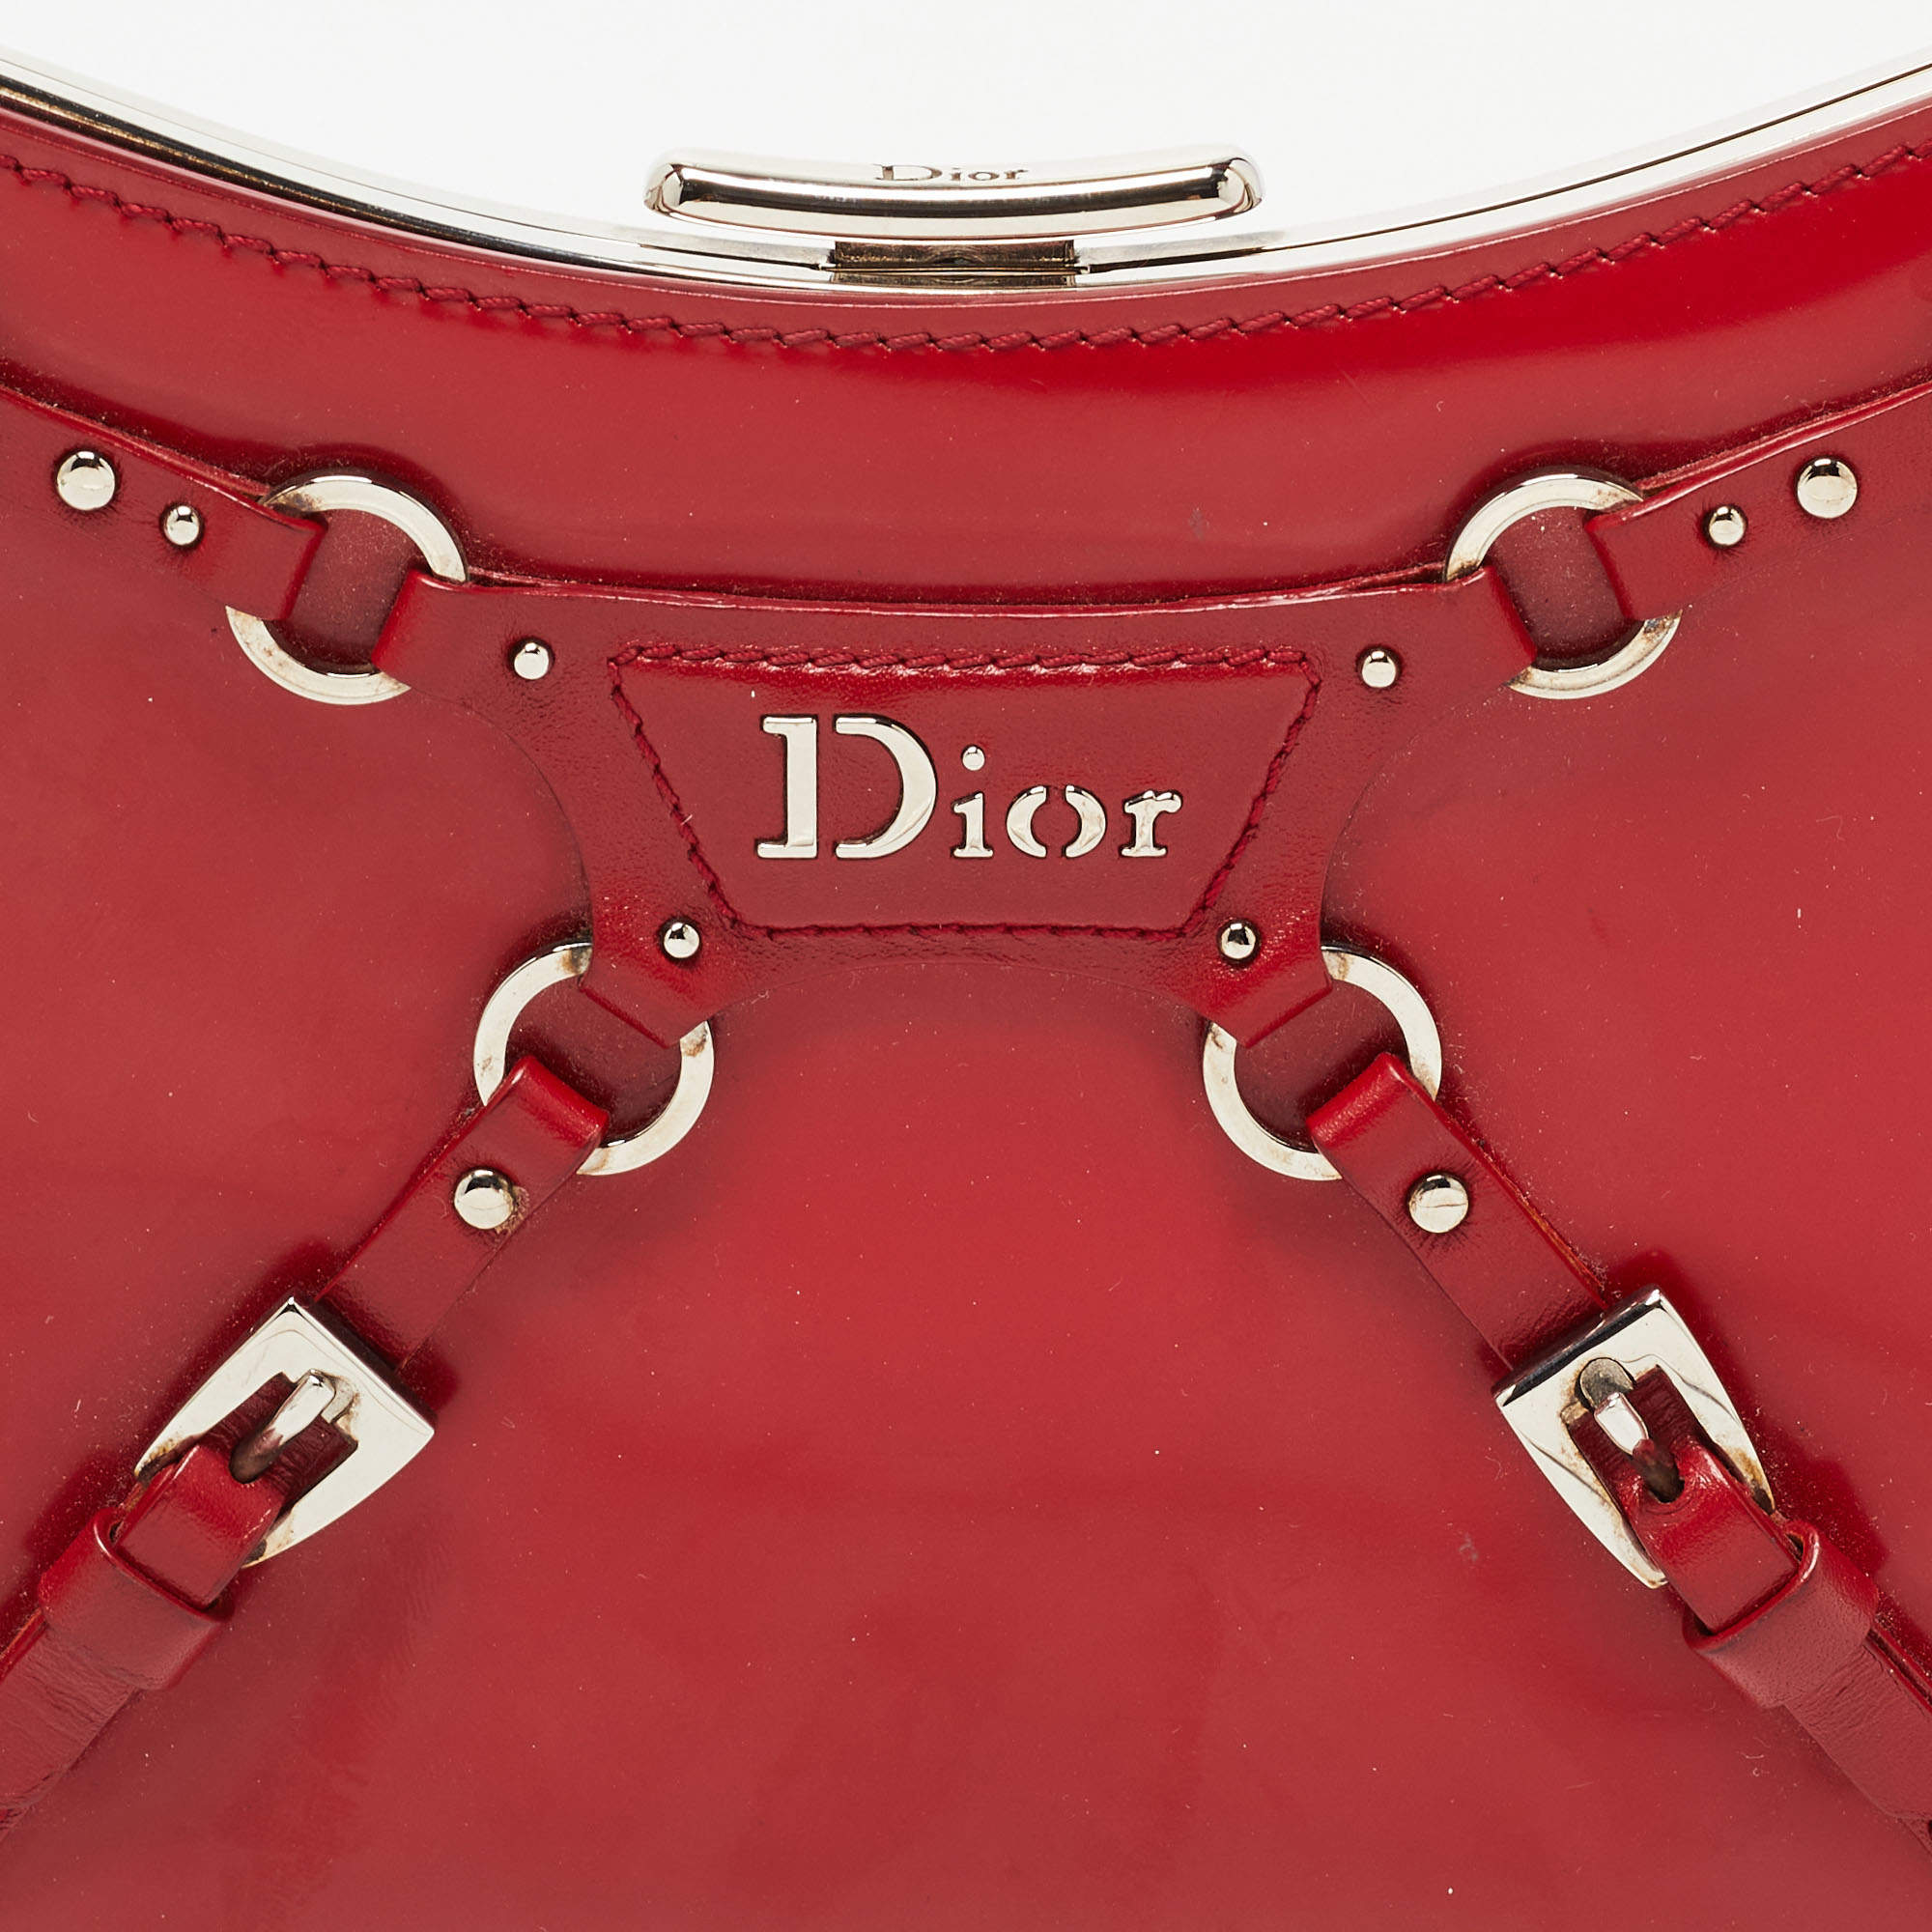 Bondage leather clutch bag Dior Red in Leather - 22686134